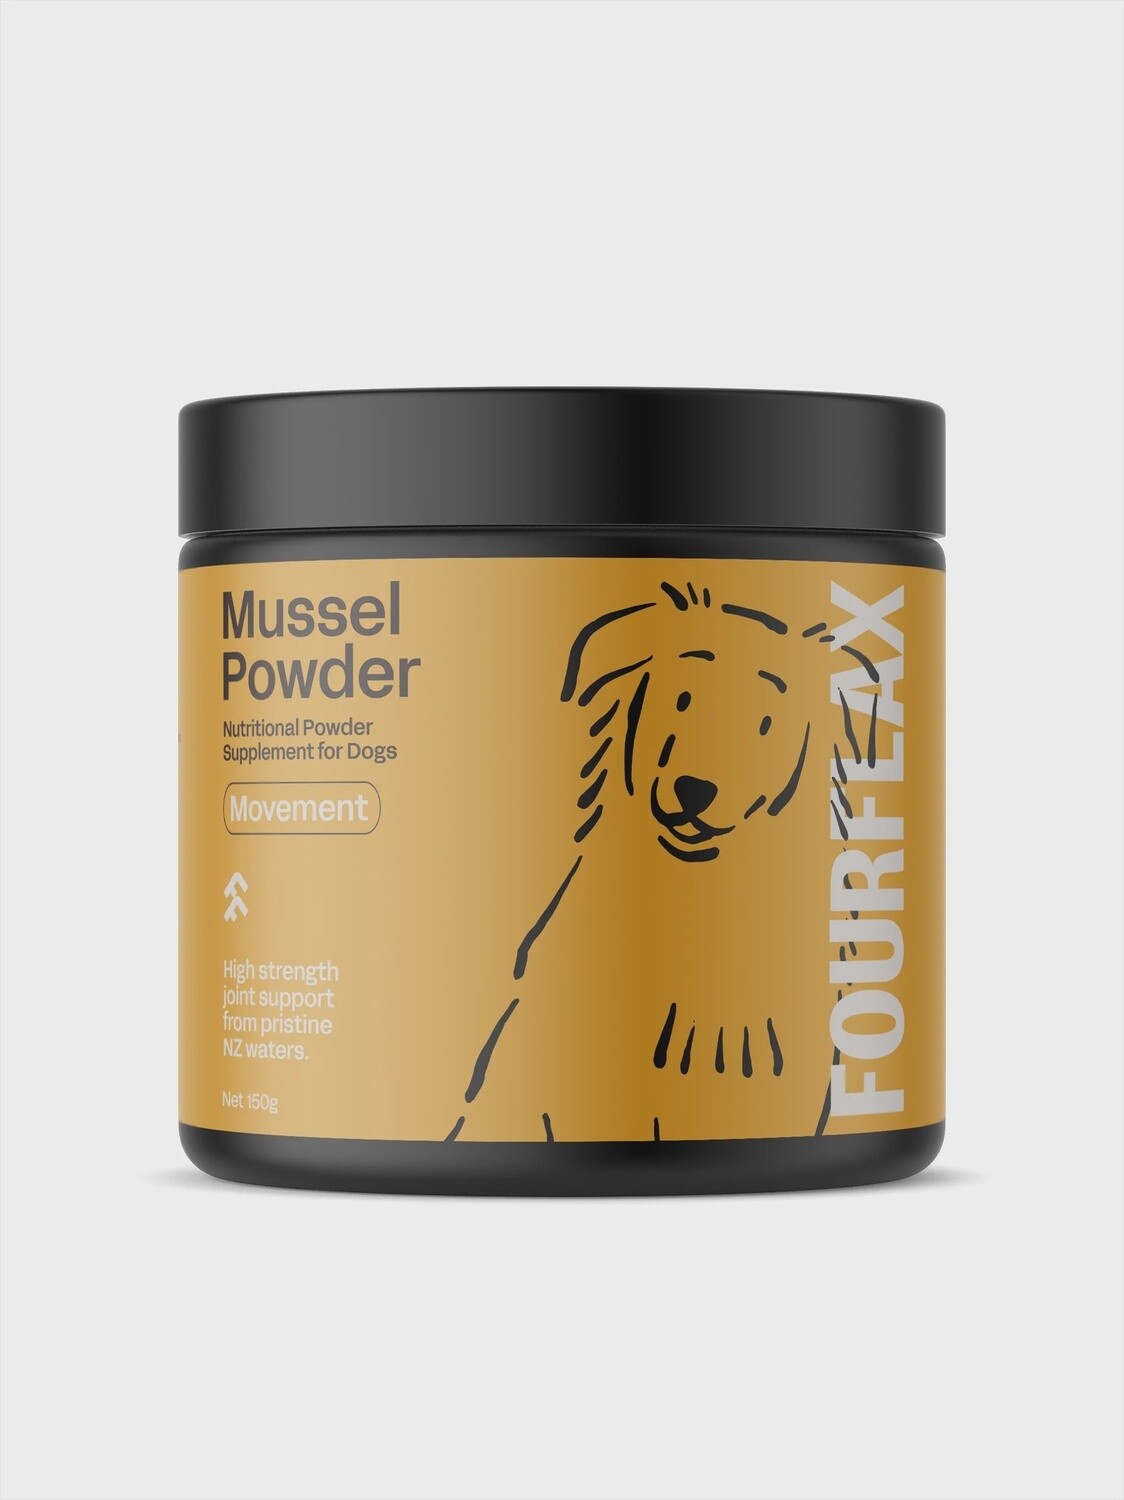 FourFlax Green Lipped Mussel Powder 150g, For: Dogs